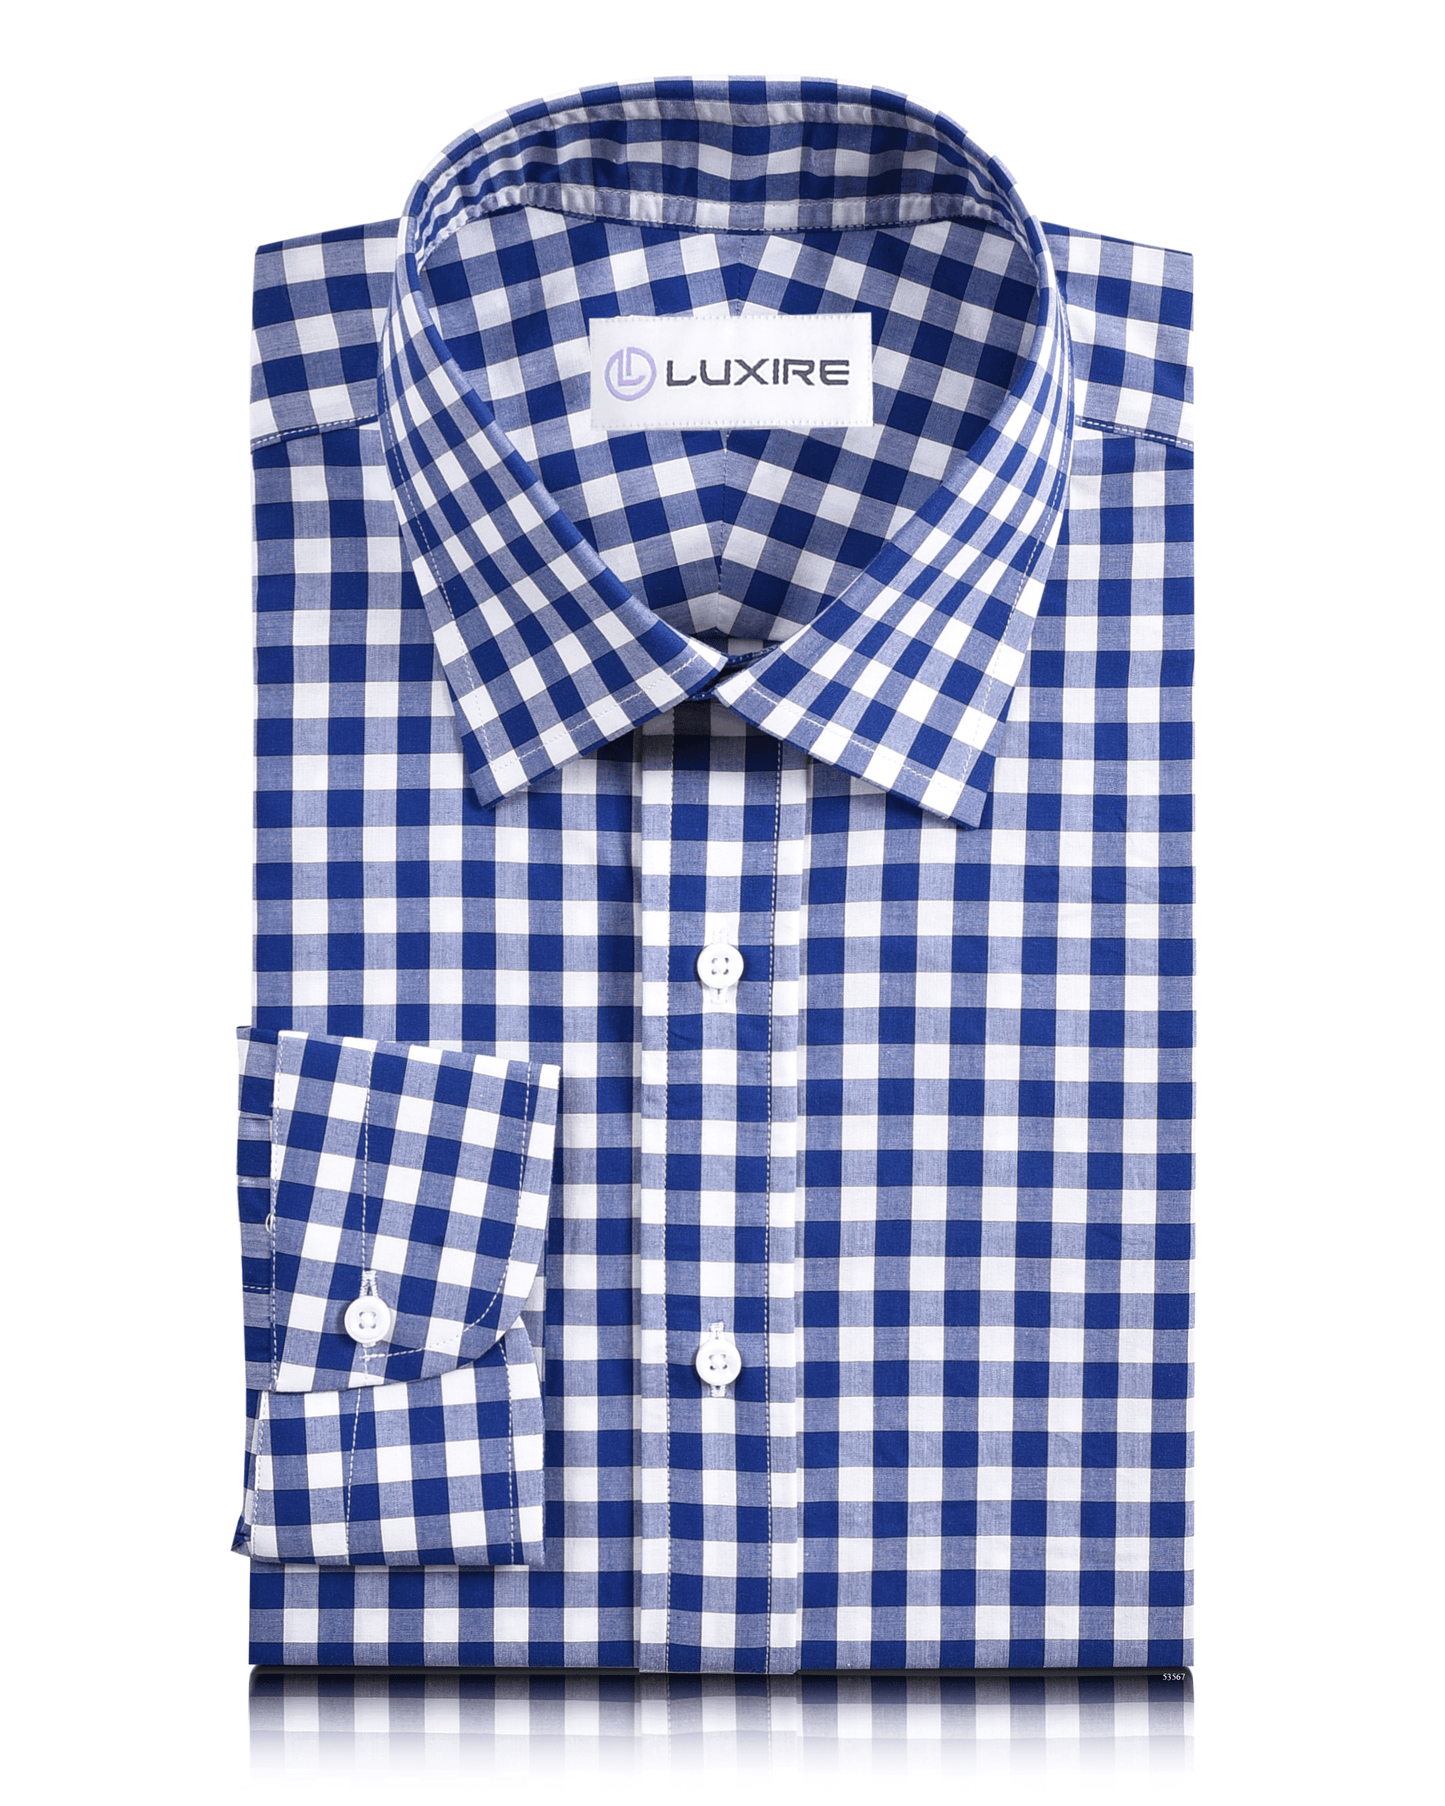 Front view of custom check shirts for men by Luxire blue gingham checks on white